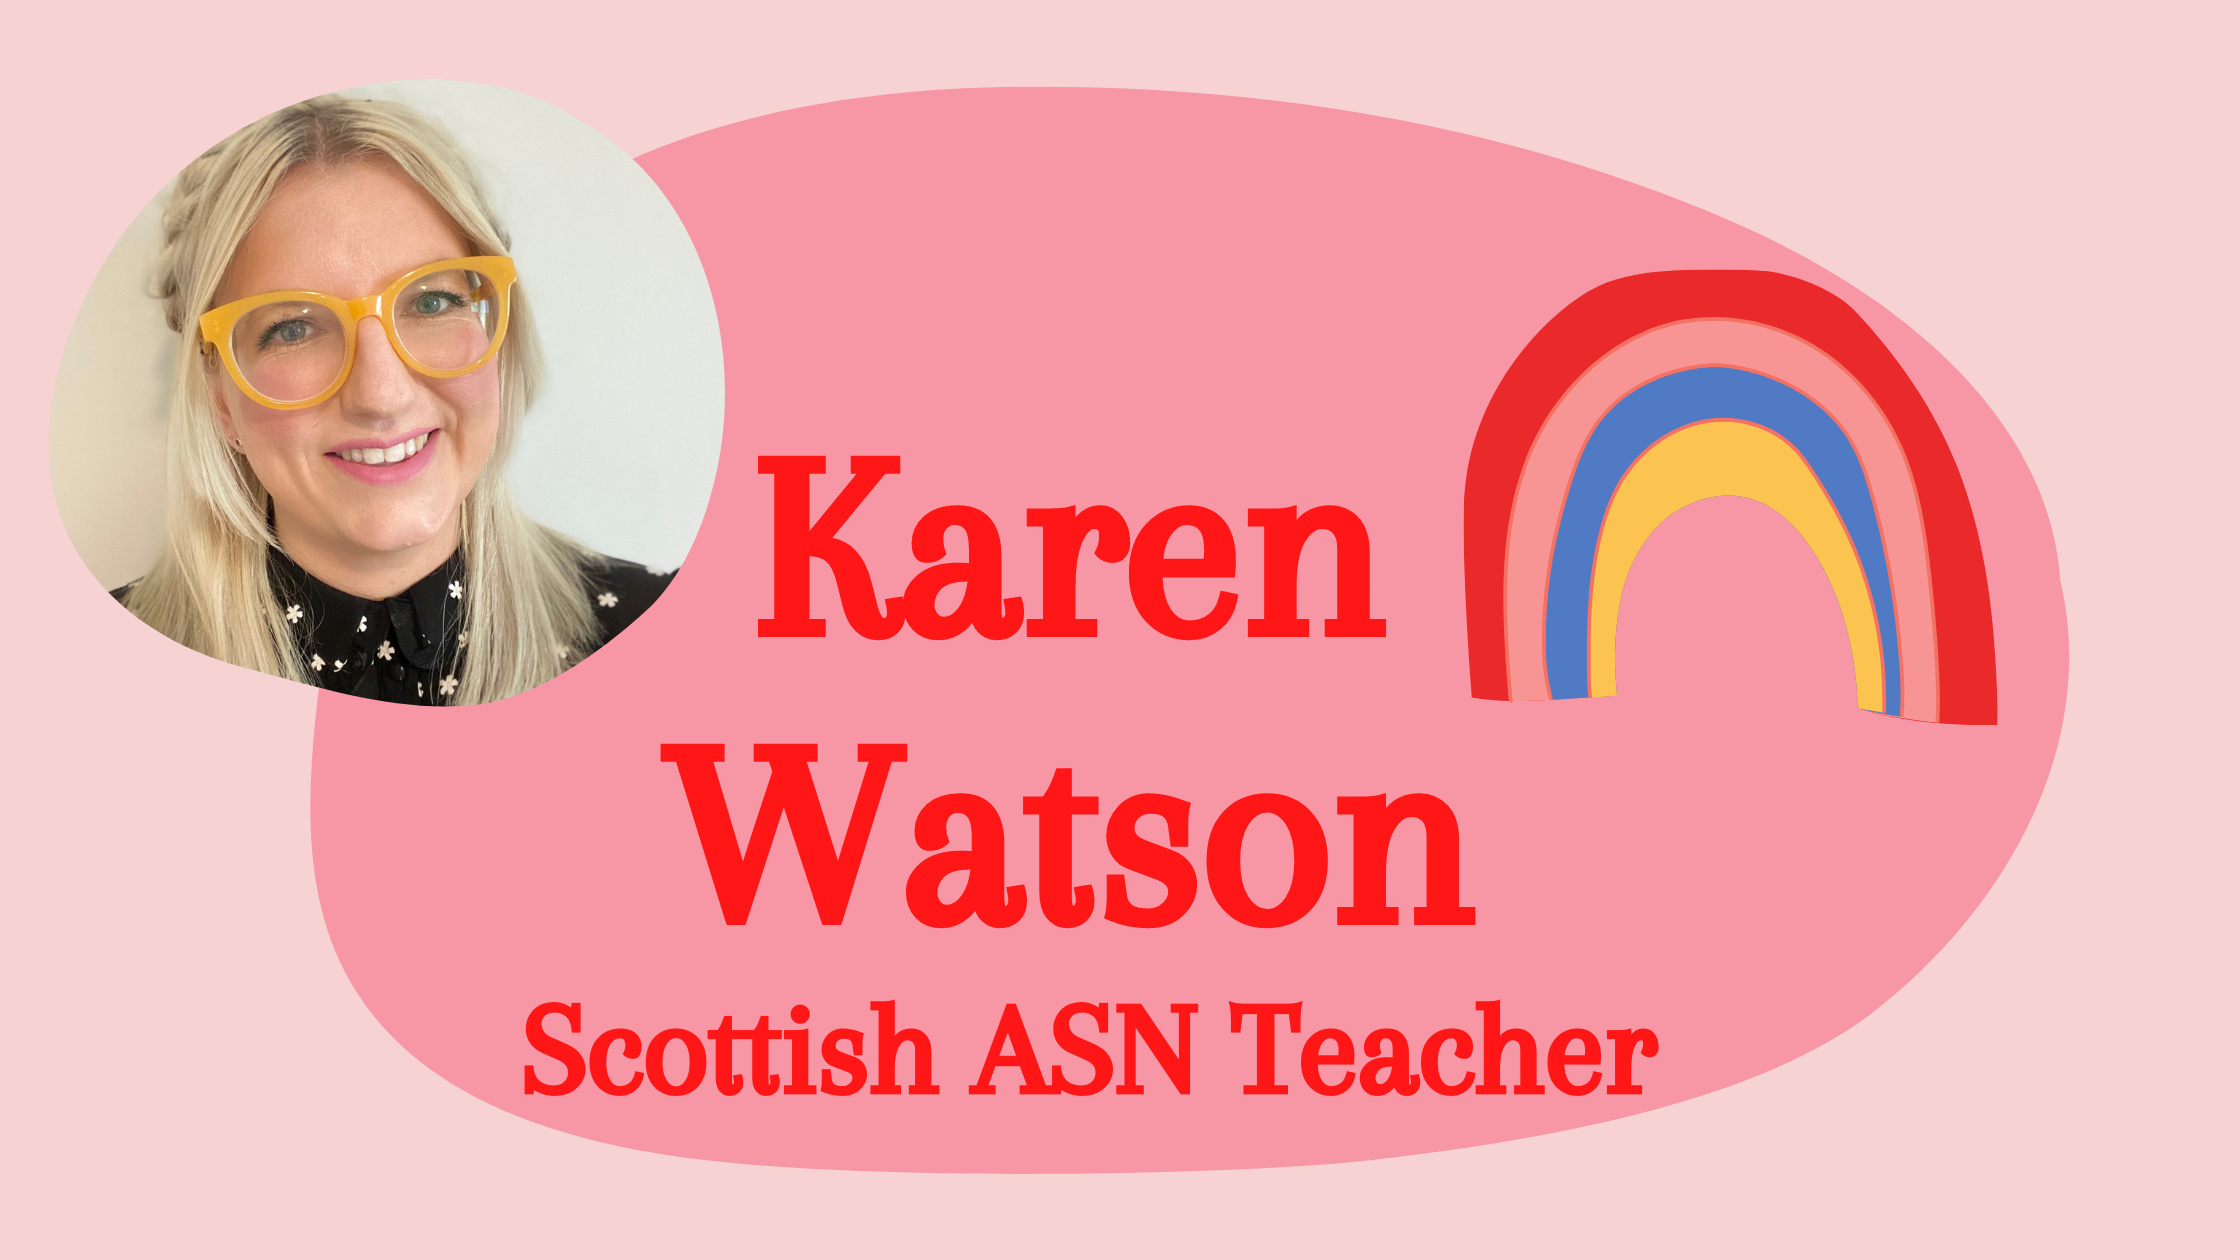 Pink banner with photo of white, blonde woman wearing glasses and a stylised rainbow. Text reads "Karen Watson Scottish ASN Teacher".